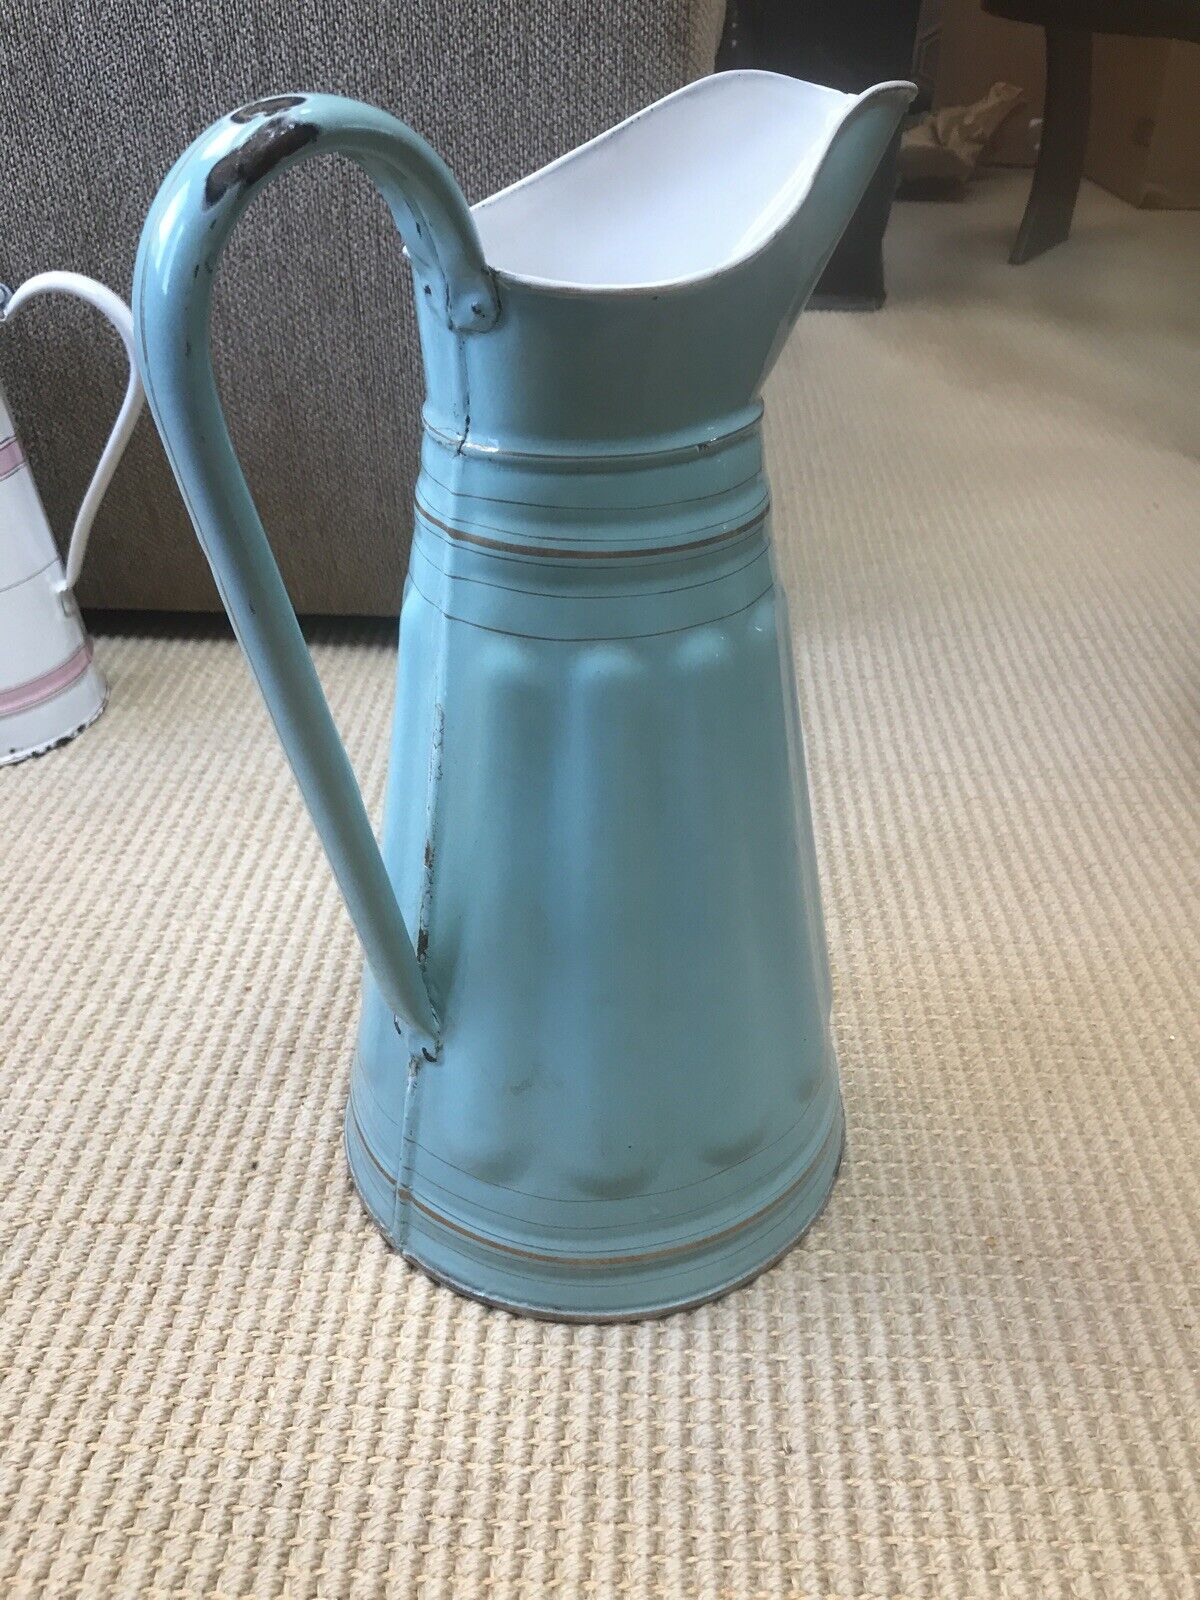 CLEARANCE ITEM-----AQUA FRENCH ENAMELWARE BODY PITCHER